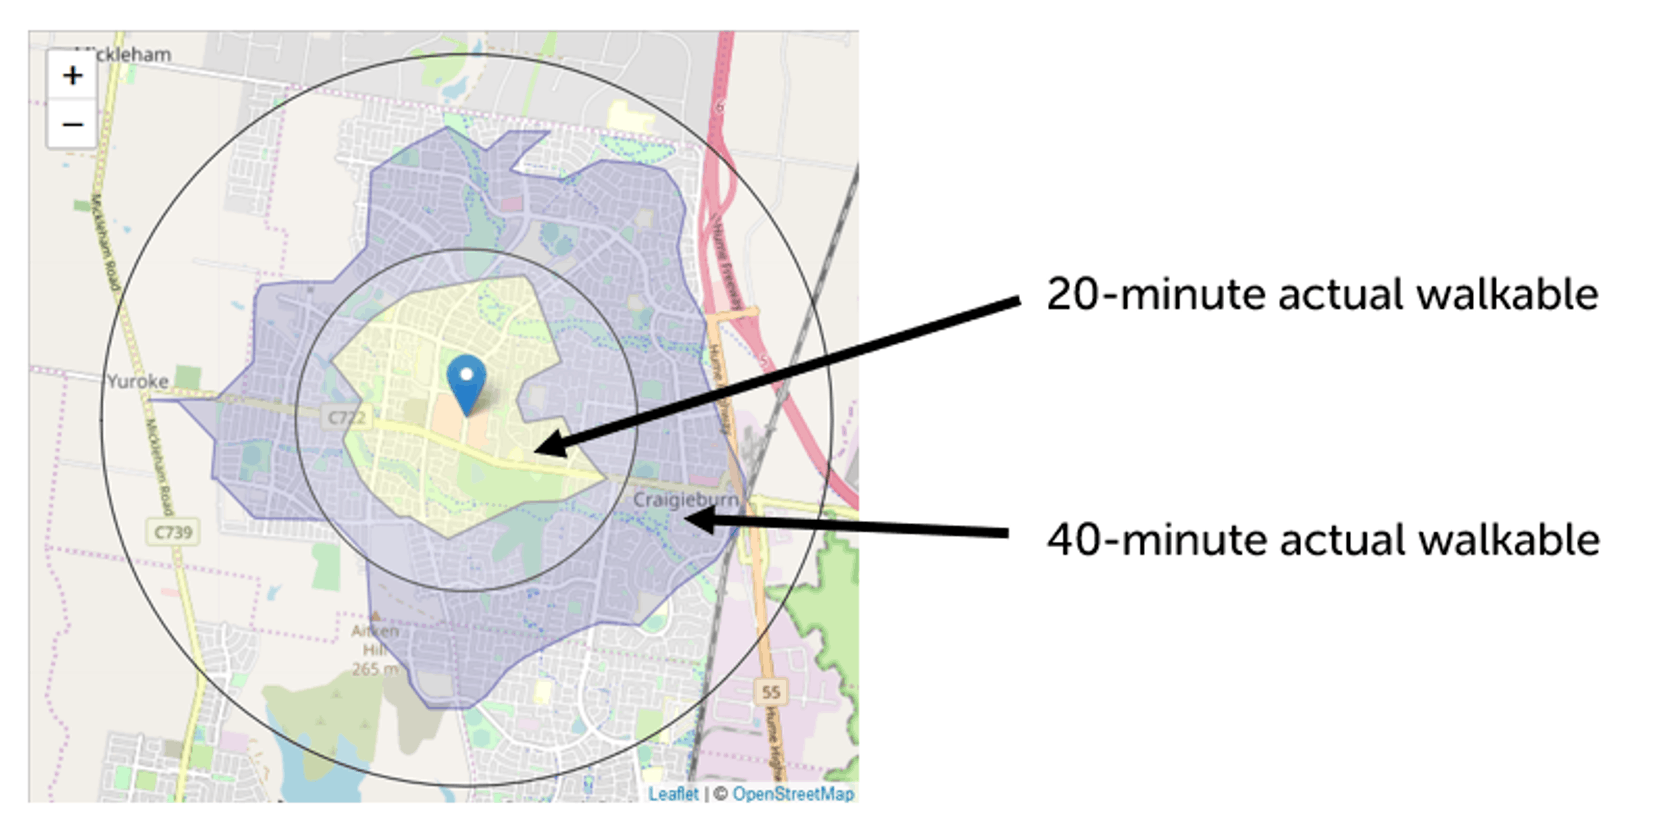 A map showing a location, and 20-minute and 40-minute actual walkable area around the site